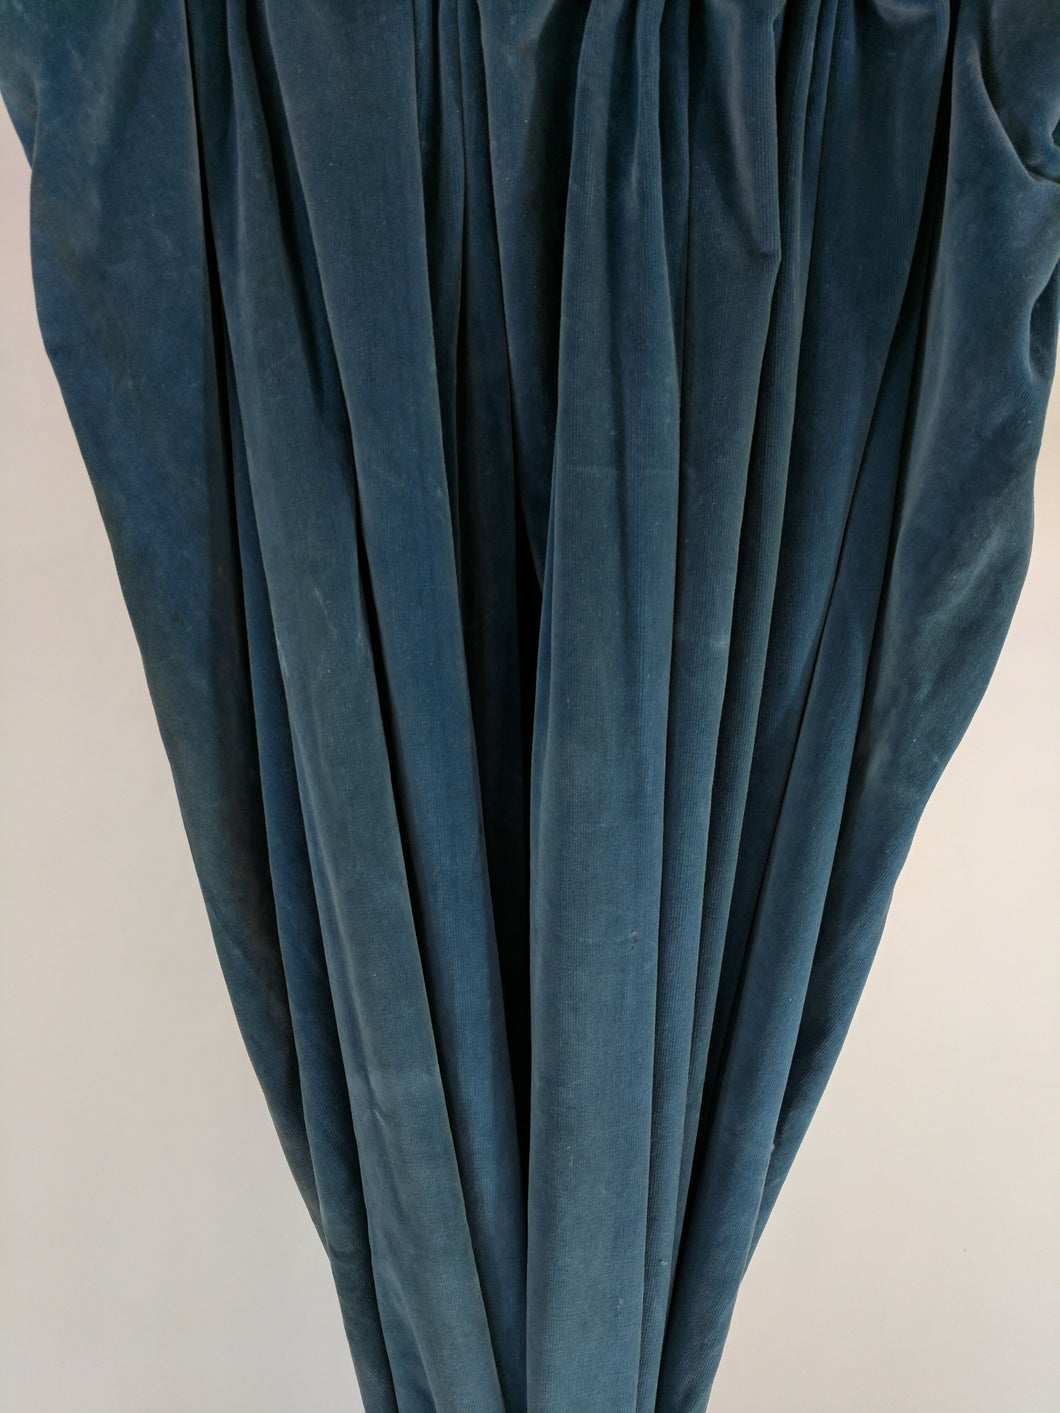 9070 - Teal / Light Blue Velvet (Some with Aging) - Triple Pleated.